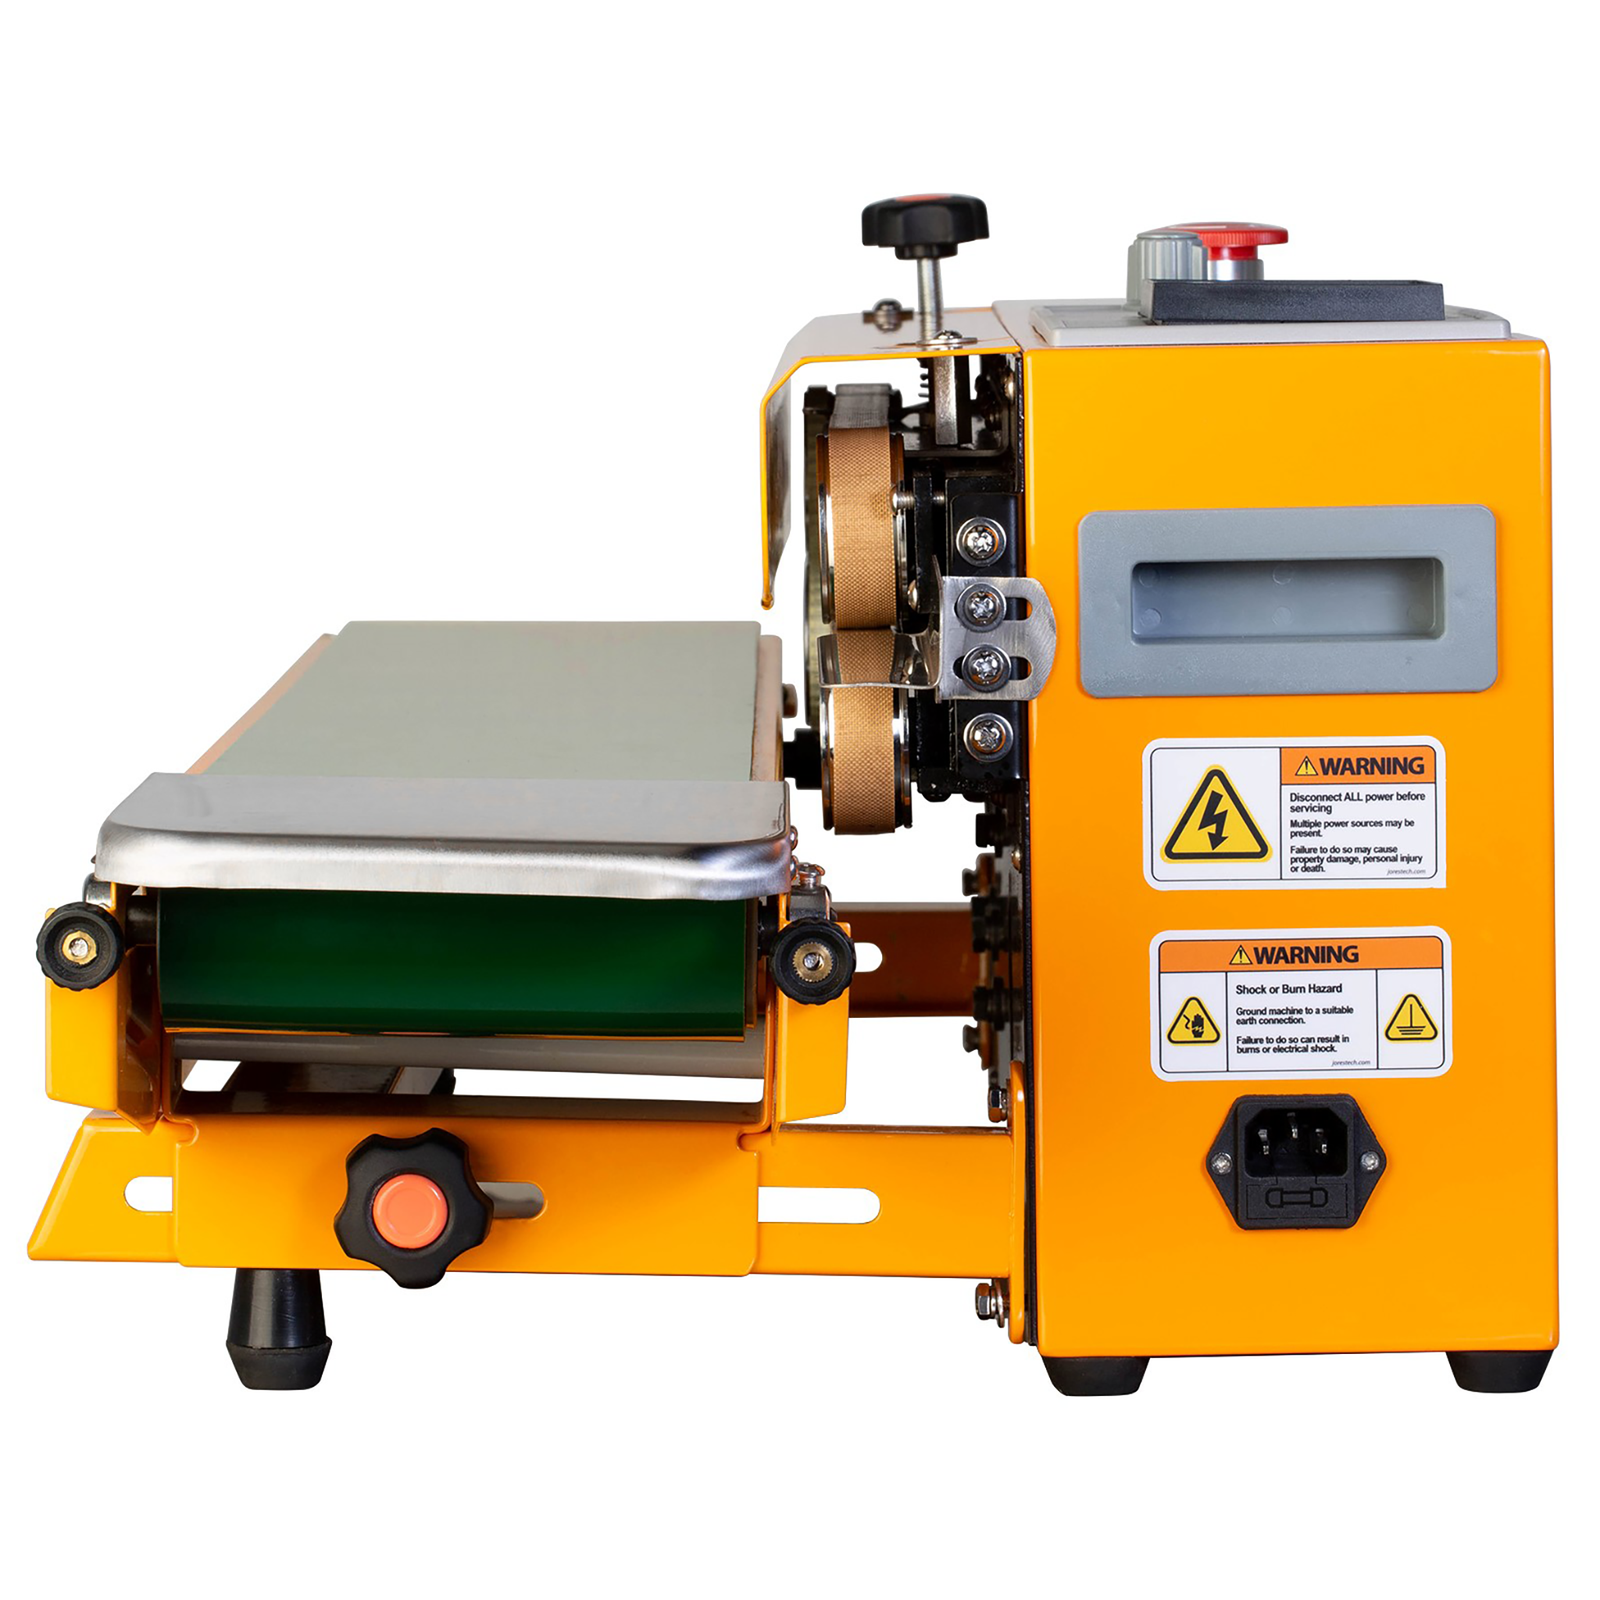 side view of the yellow JORESTECH continuous band sealing machine with green revolving band. Machine is set for horizontal sealing applications